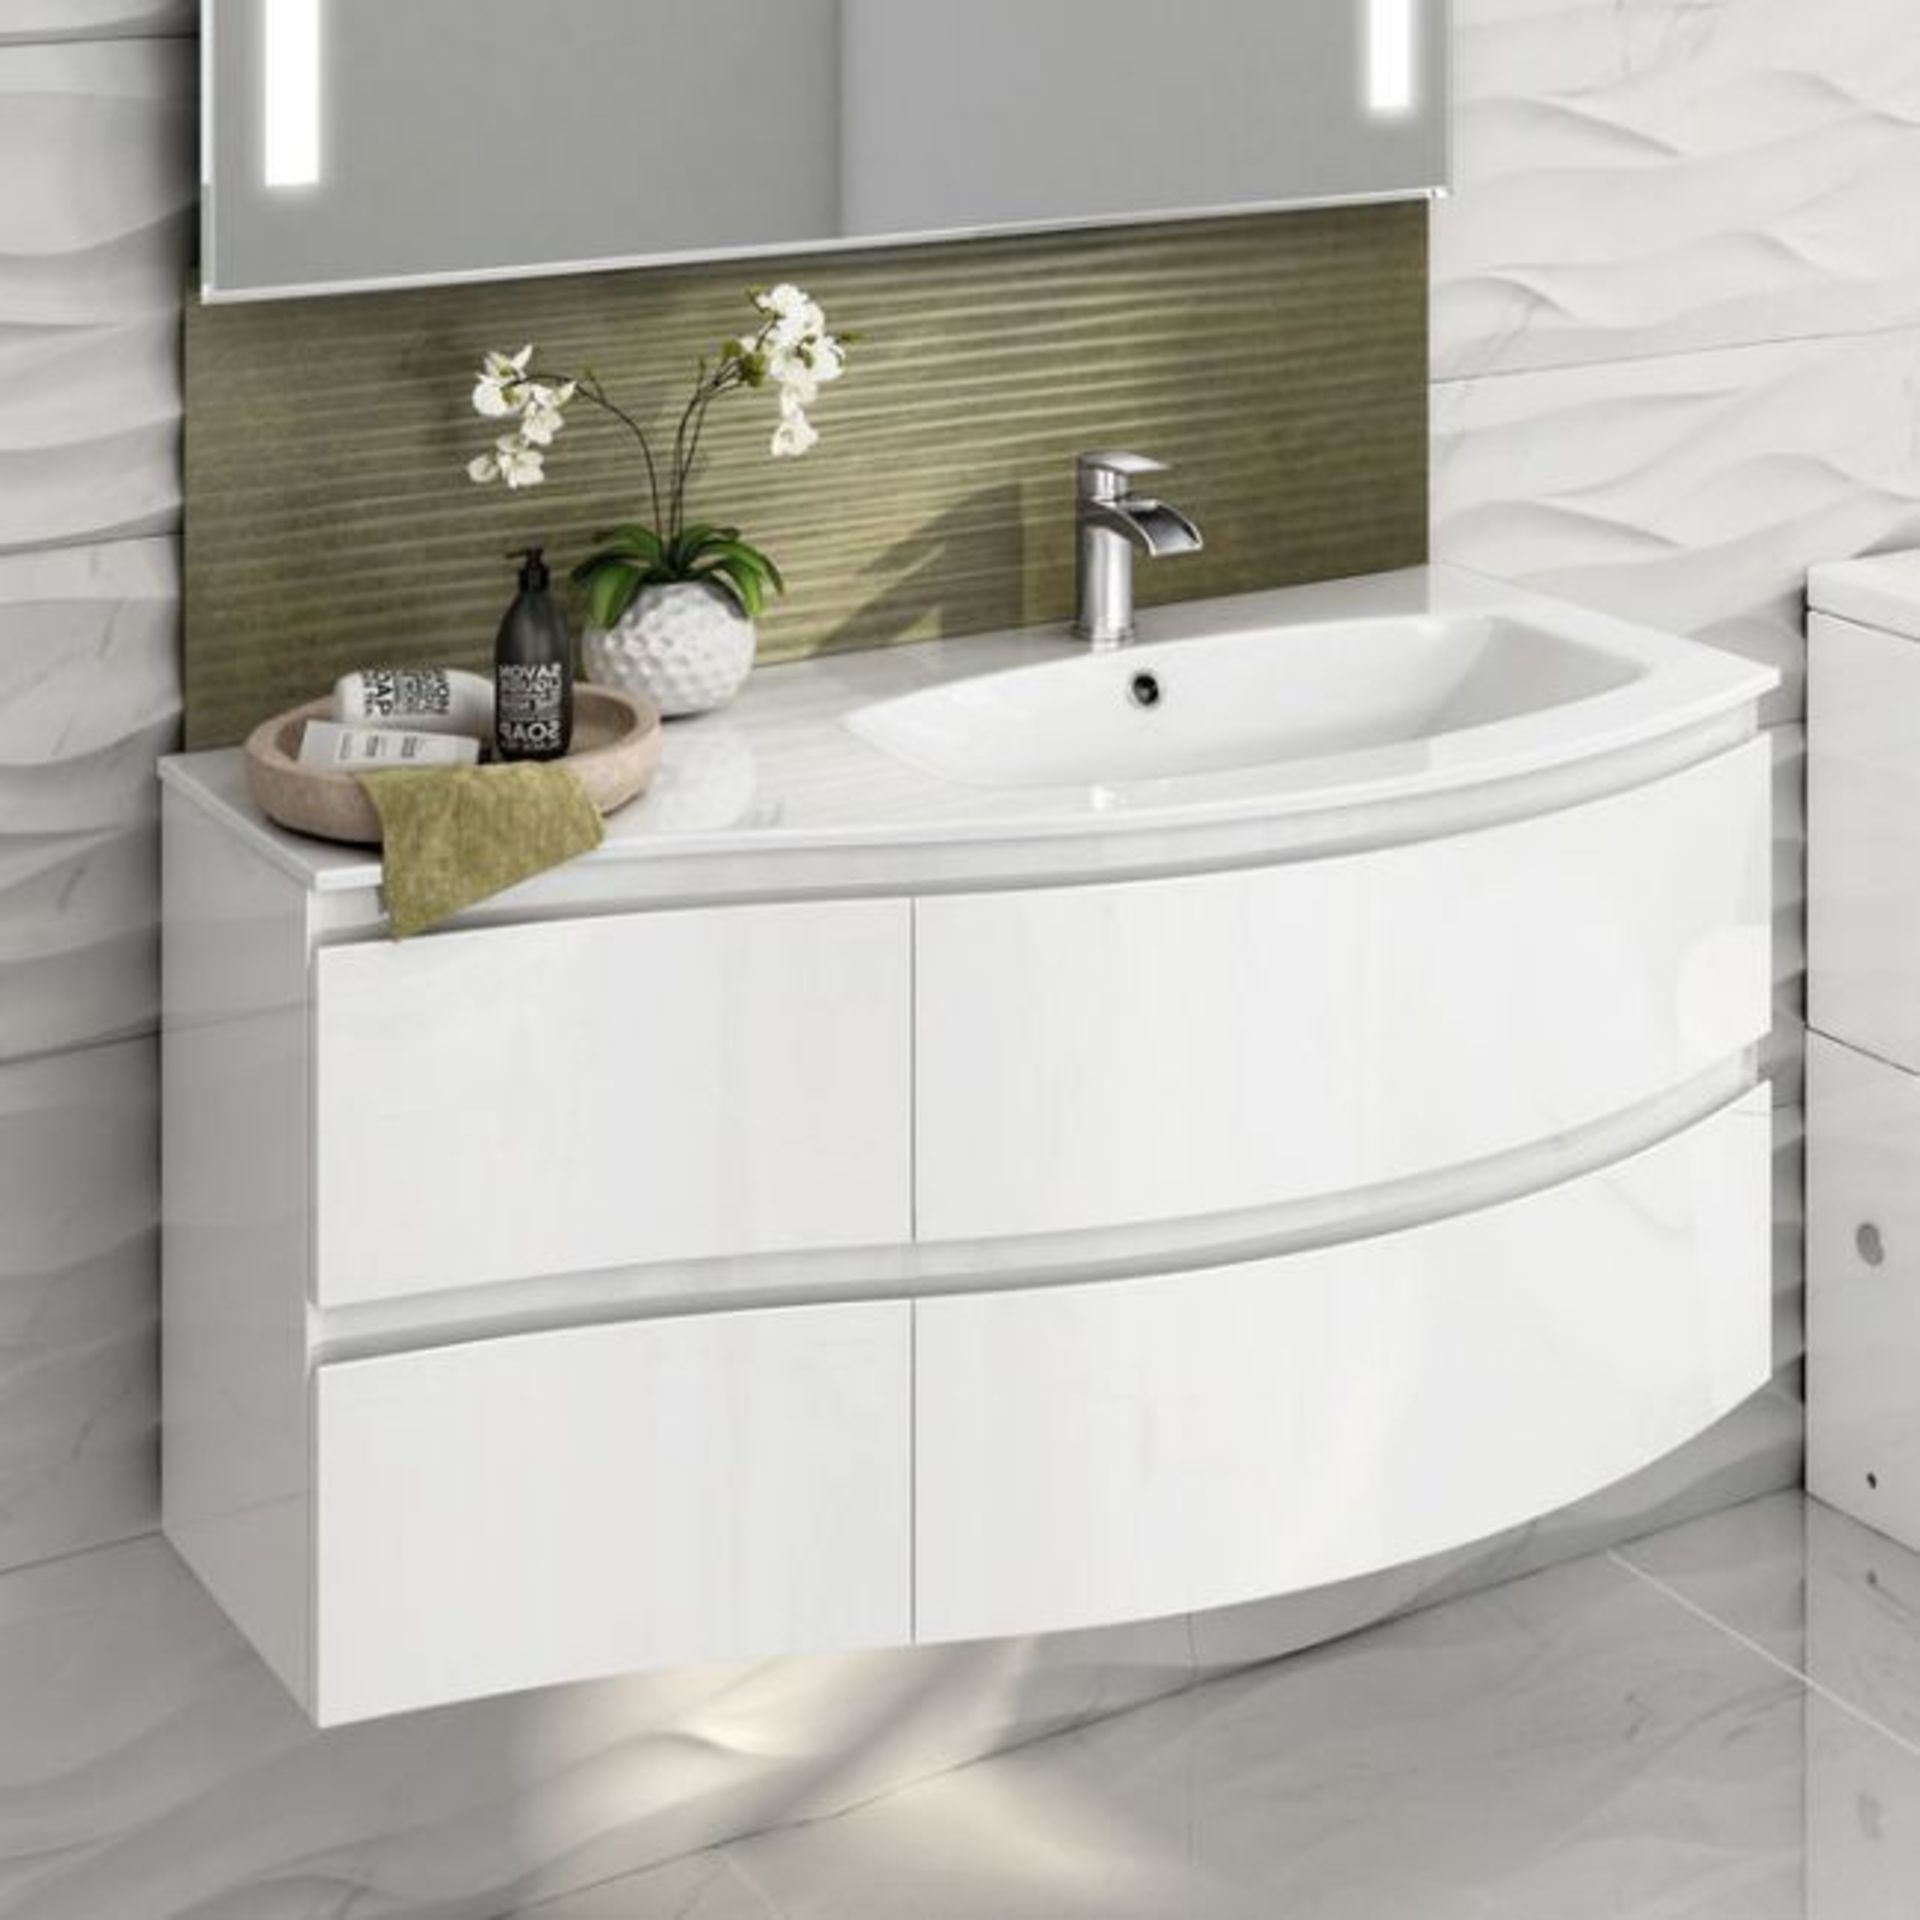 New 1040mm Amelie High Gloss White Curved Vanity Unit - Right Hand - Wall Hung. Comes Complete...